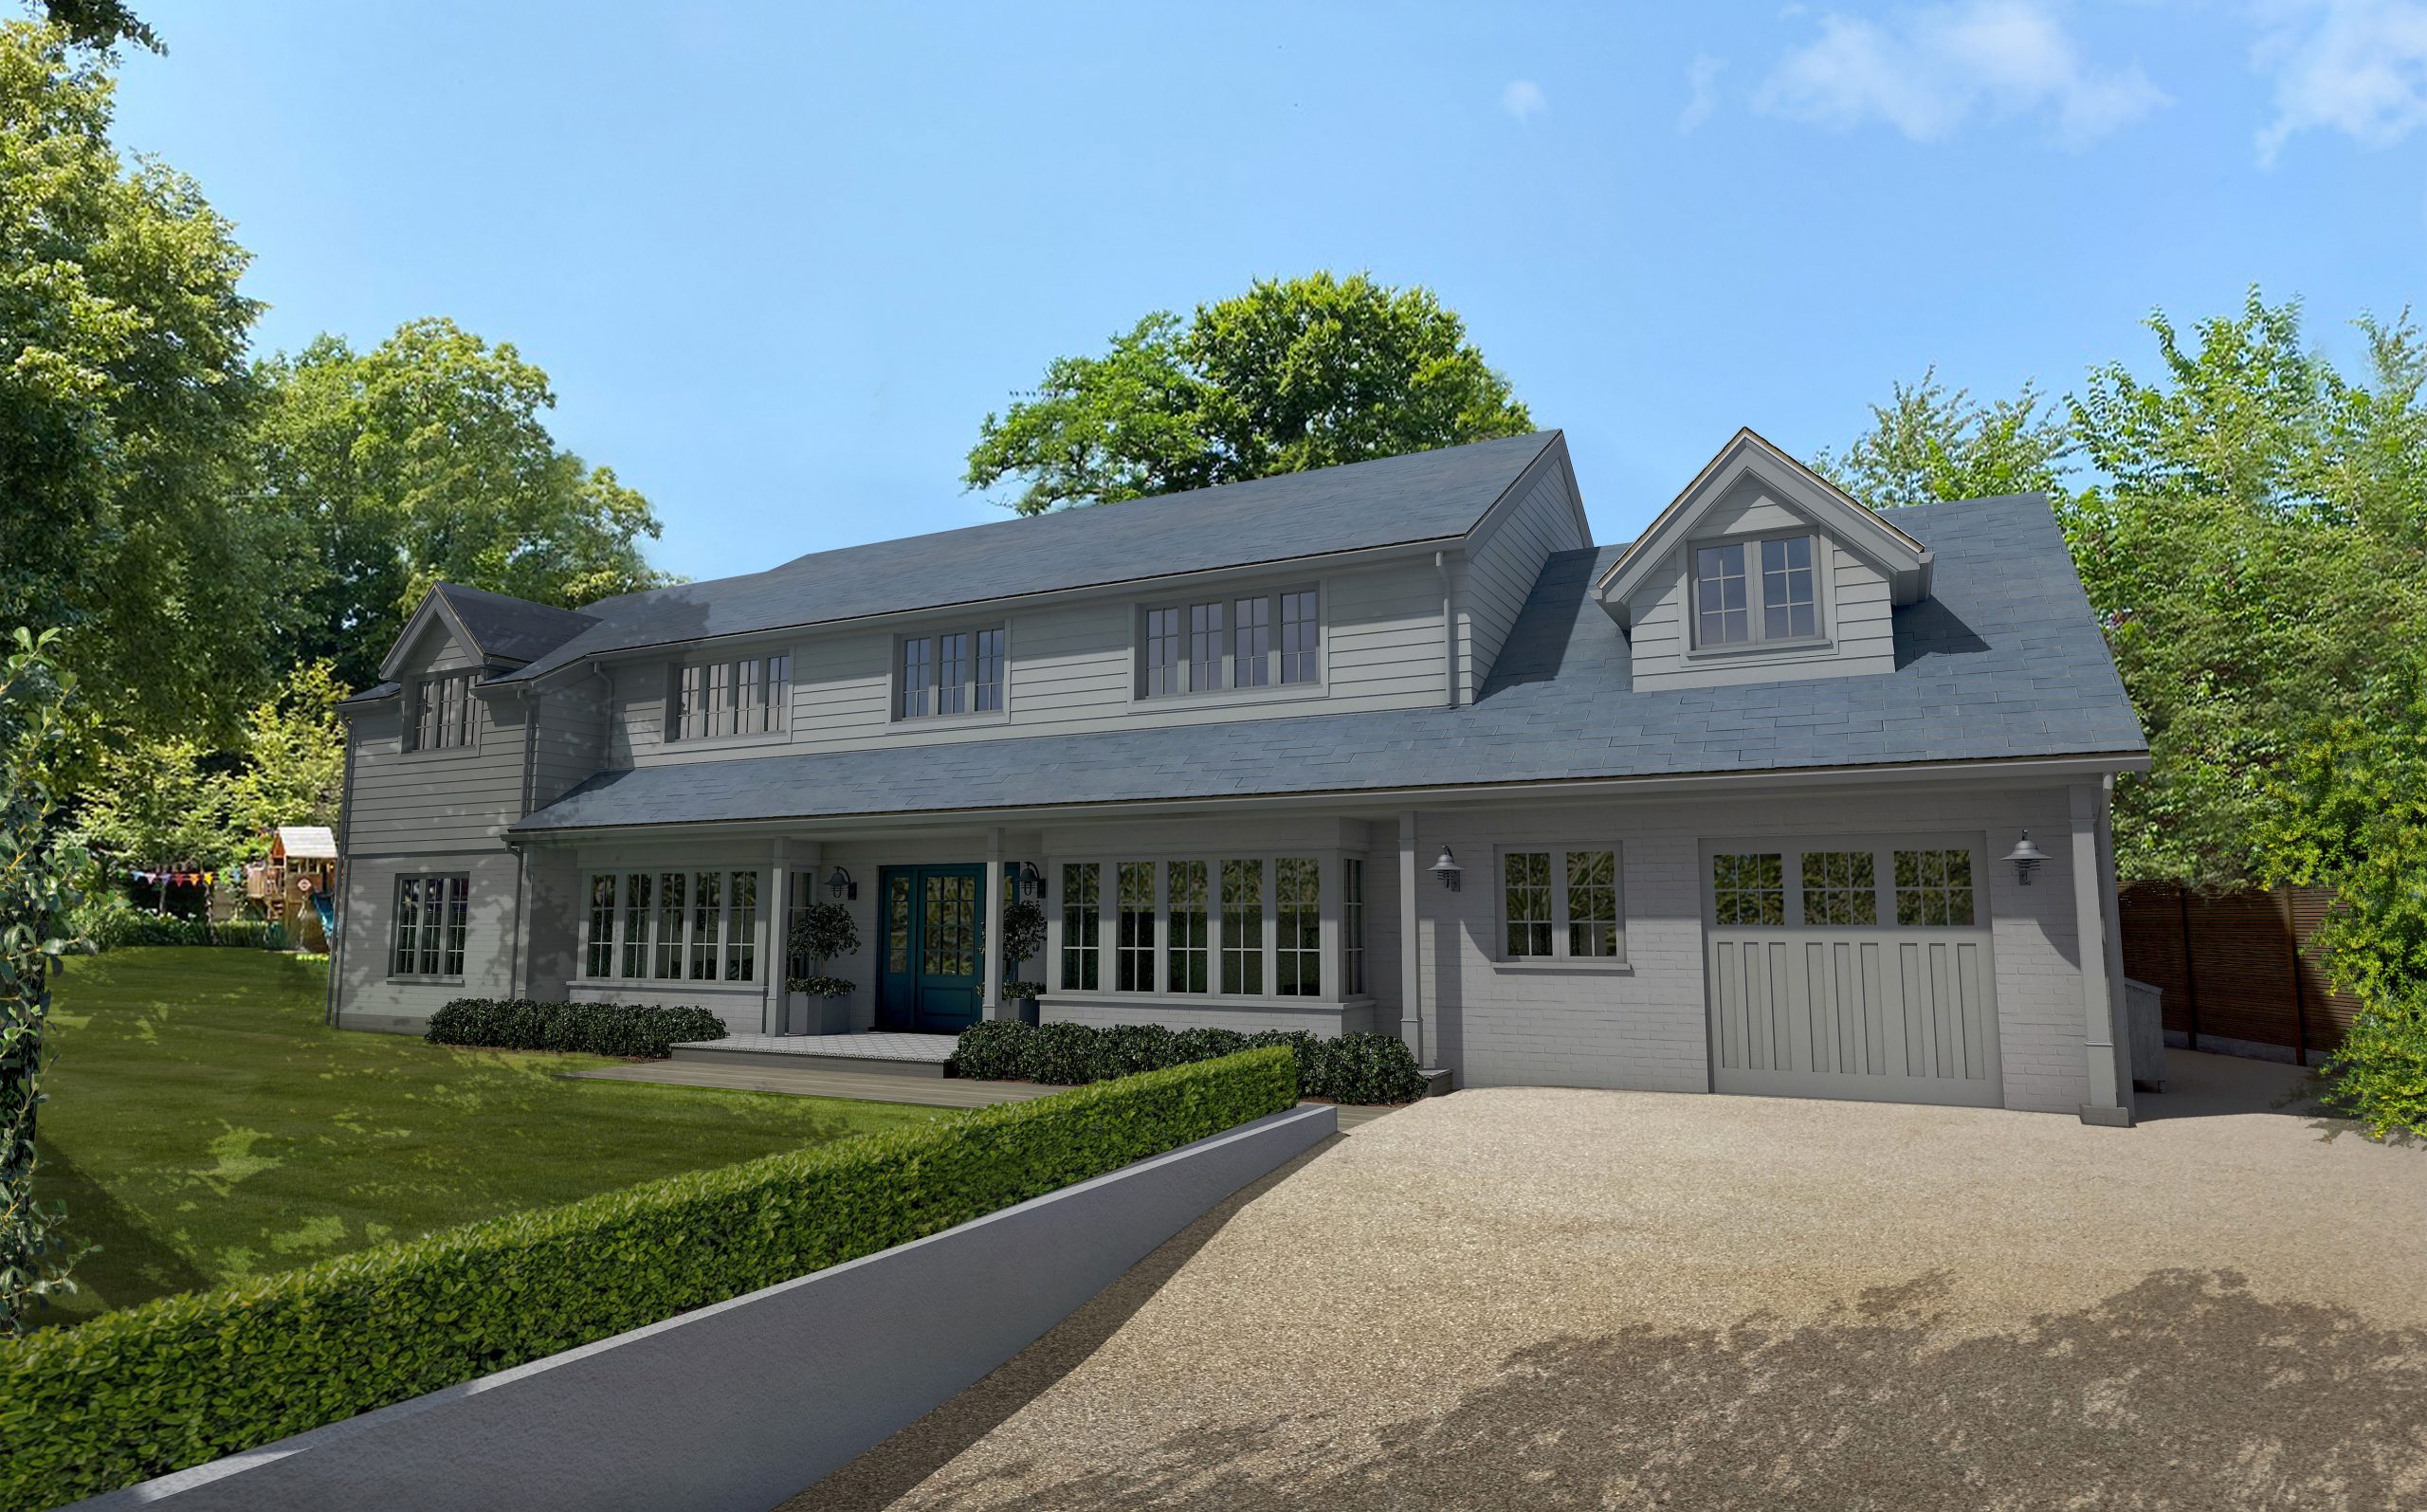 The Henley on Thames Project